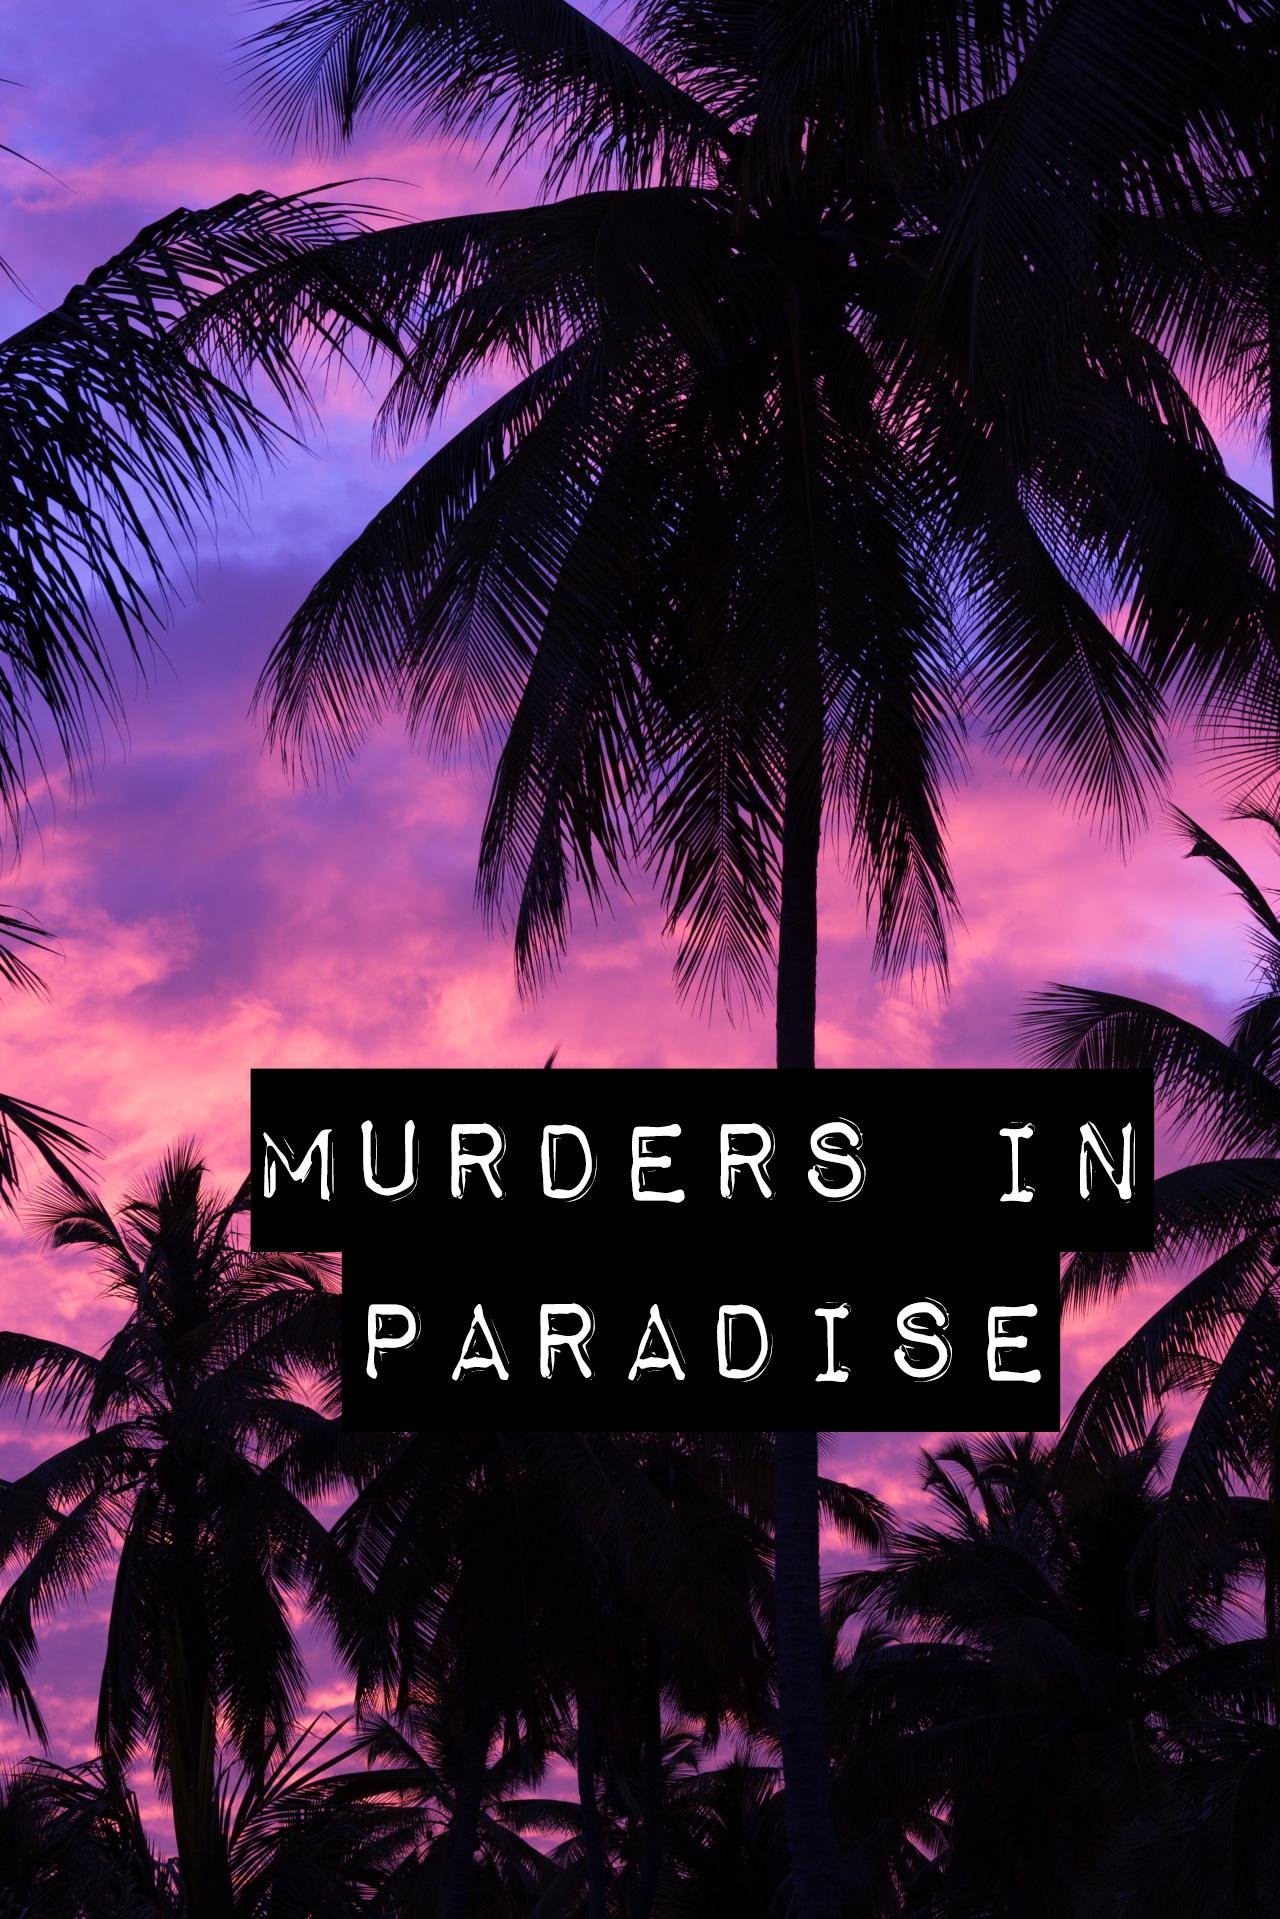 True crime podcast focused on murders in the Florida Keys